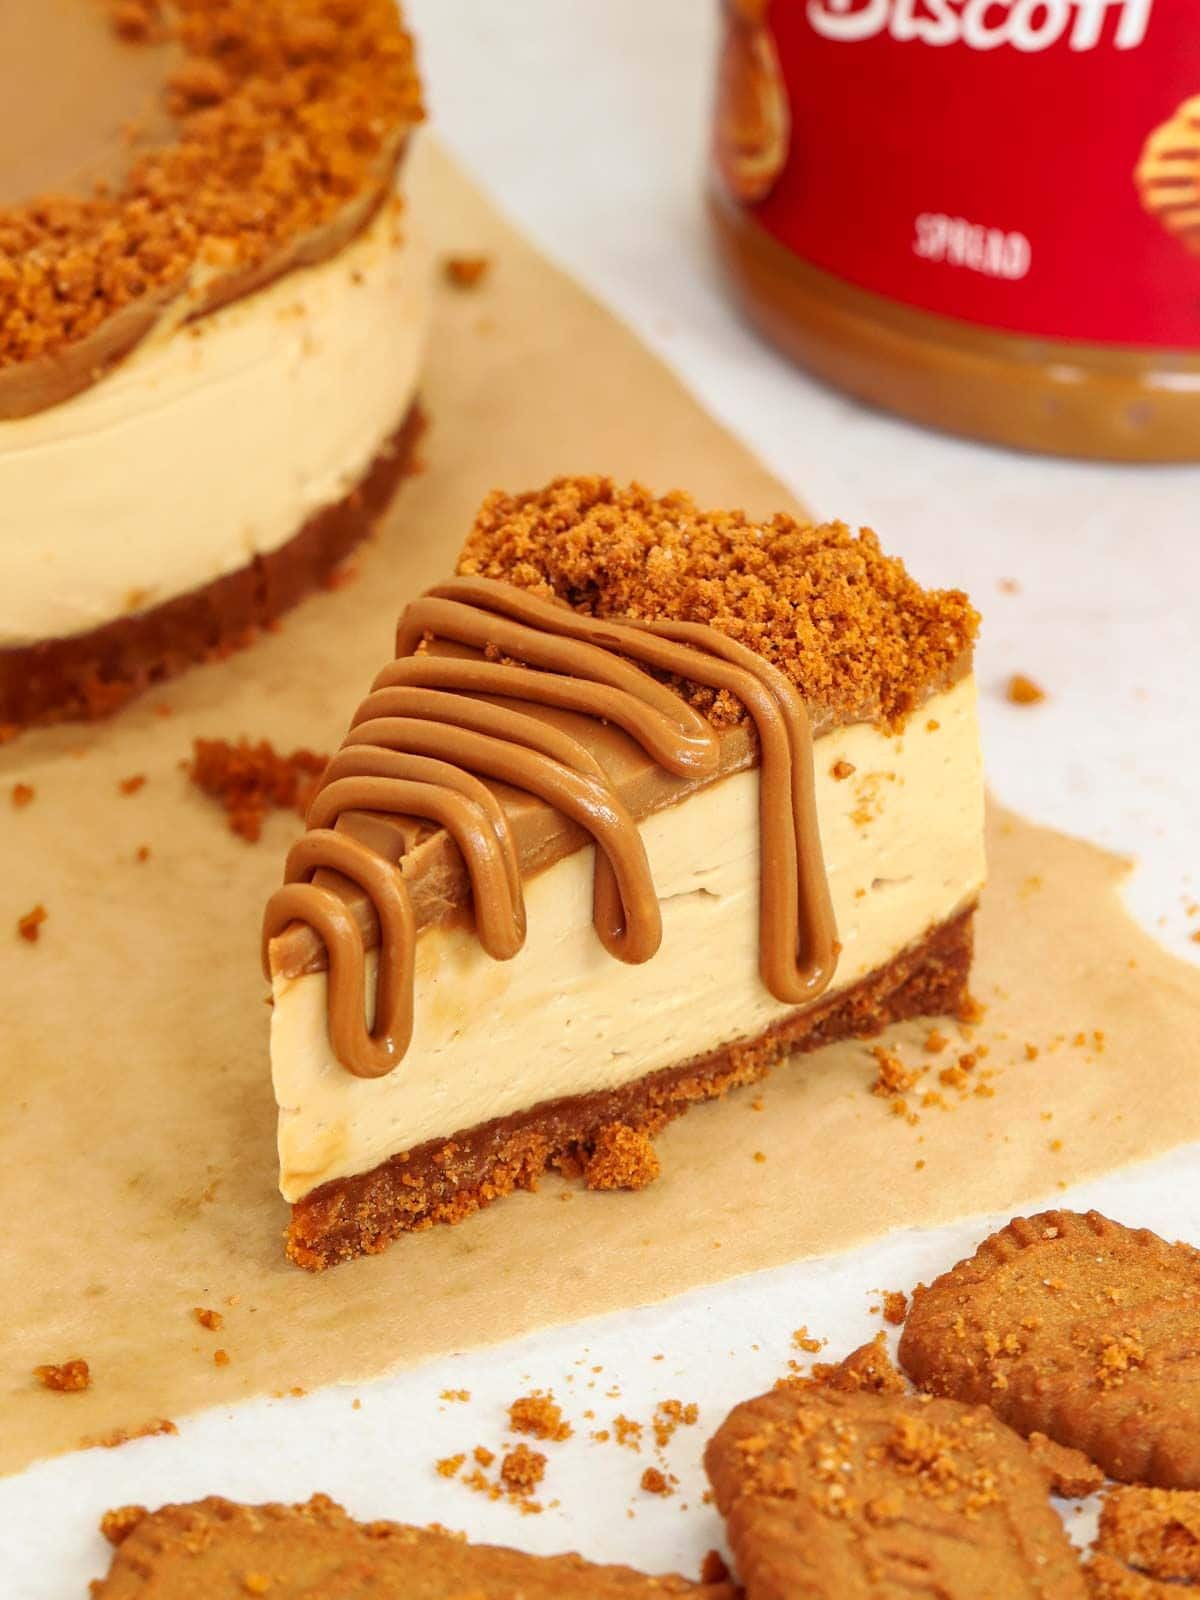 A slice of Biscoff cheesecake on a sheet of baking paper, ready to eat.